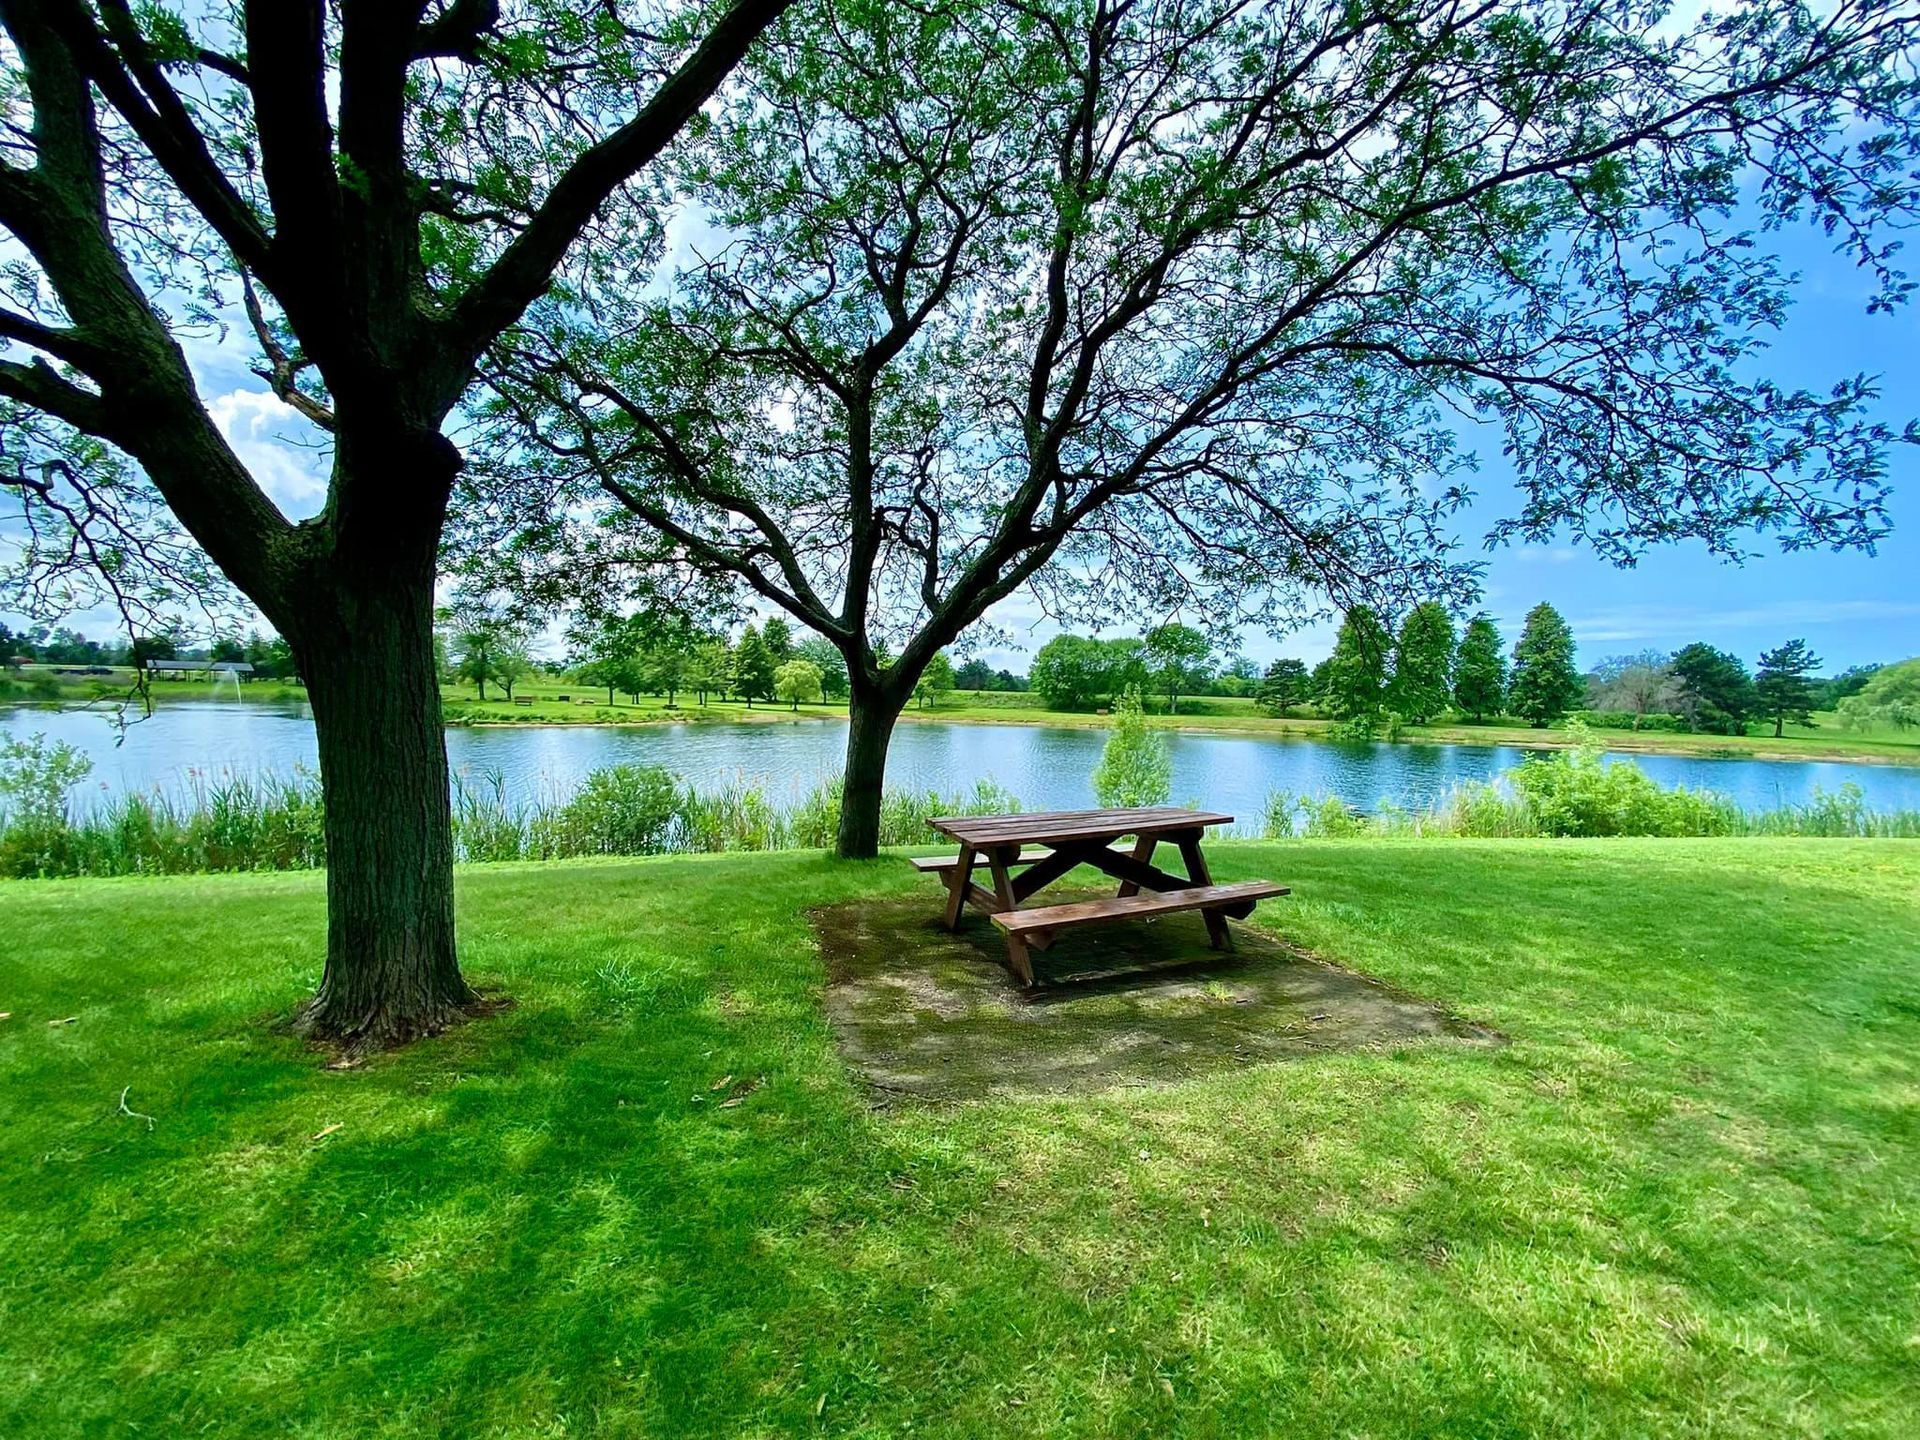 a picnic table is sitting in the middle of a grassy field next to a lake .